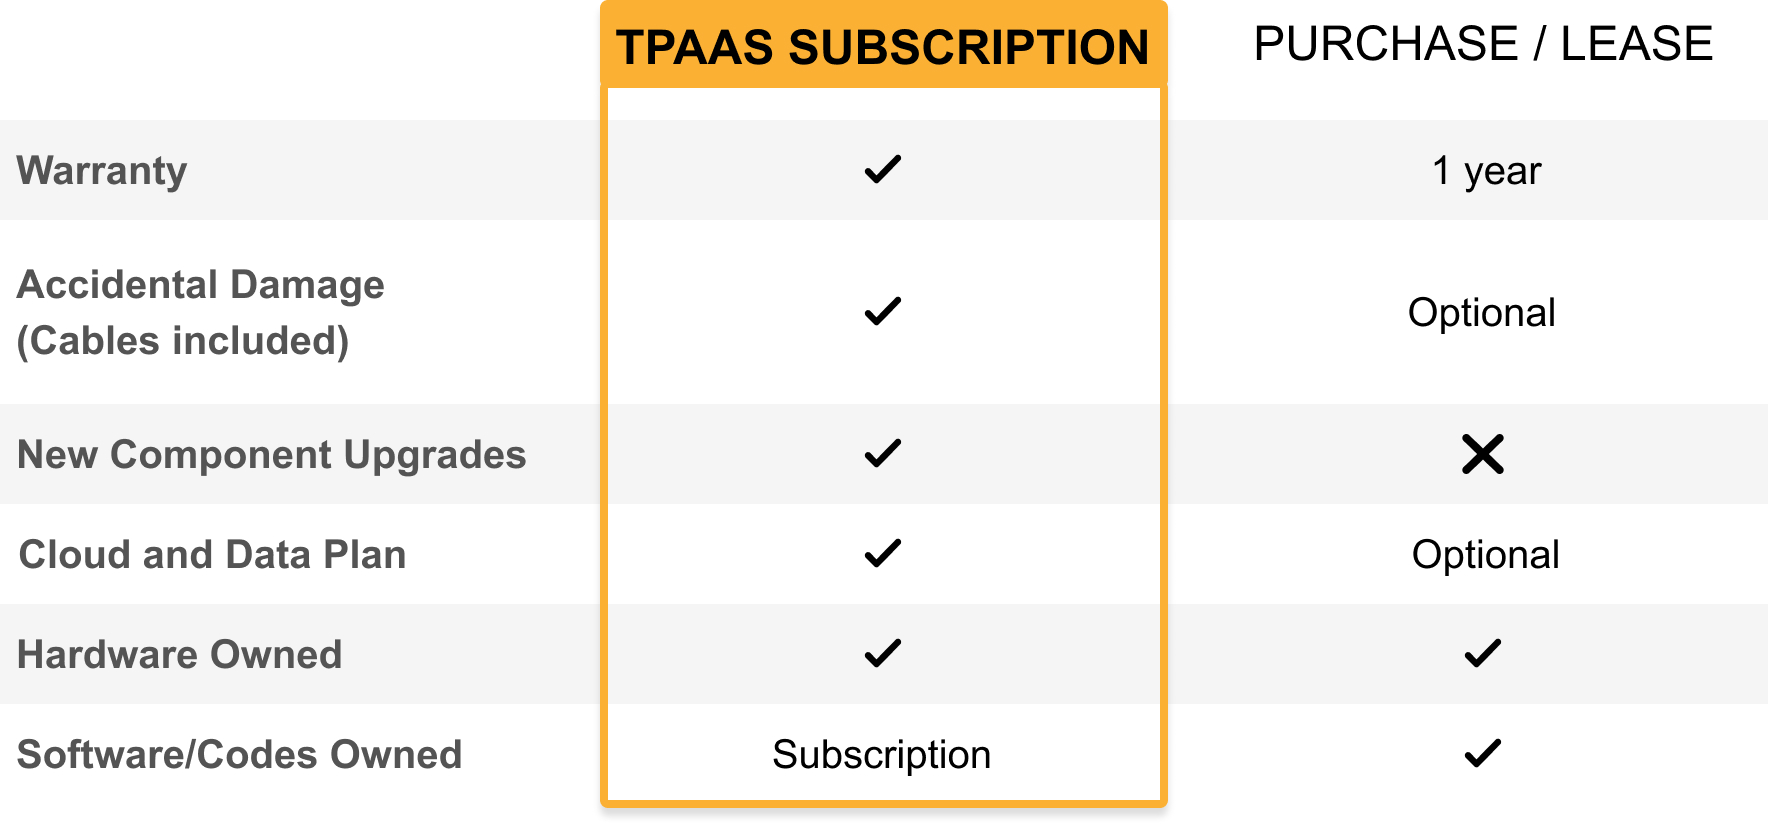 tpaas vs. conventional purchase or lease